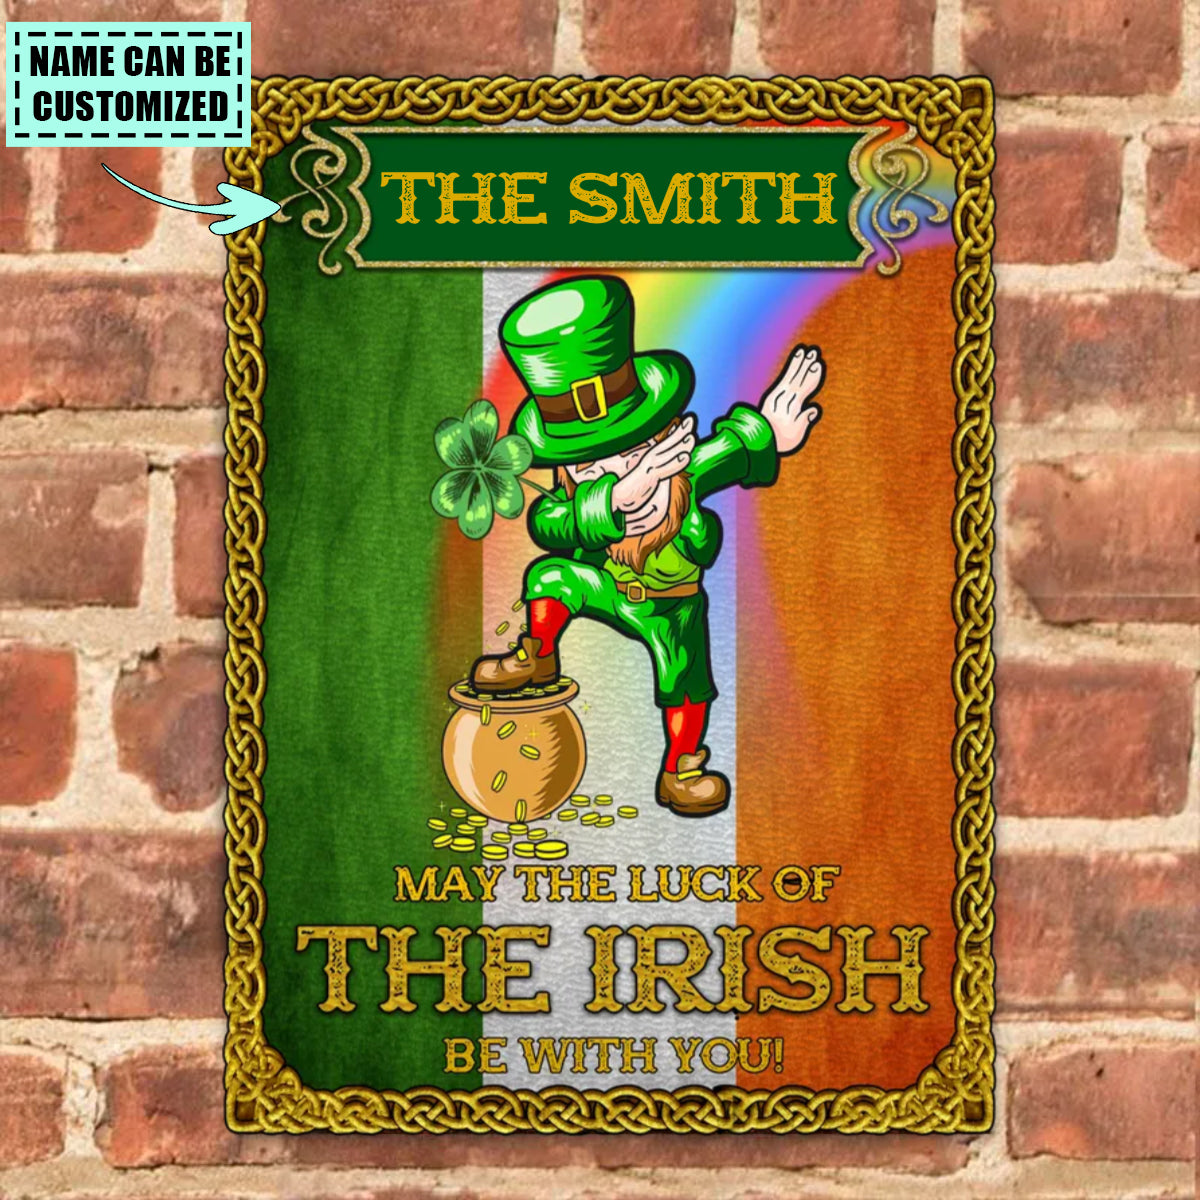 Personalized Metal Sign St Patrick's Day Luck Of The Irish CTM02 One Size 24x18 inch (60.96x45.72 cm) Custom - Printyourwear